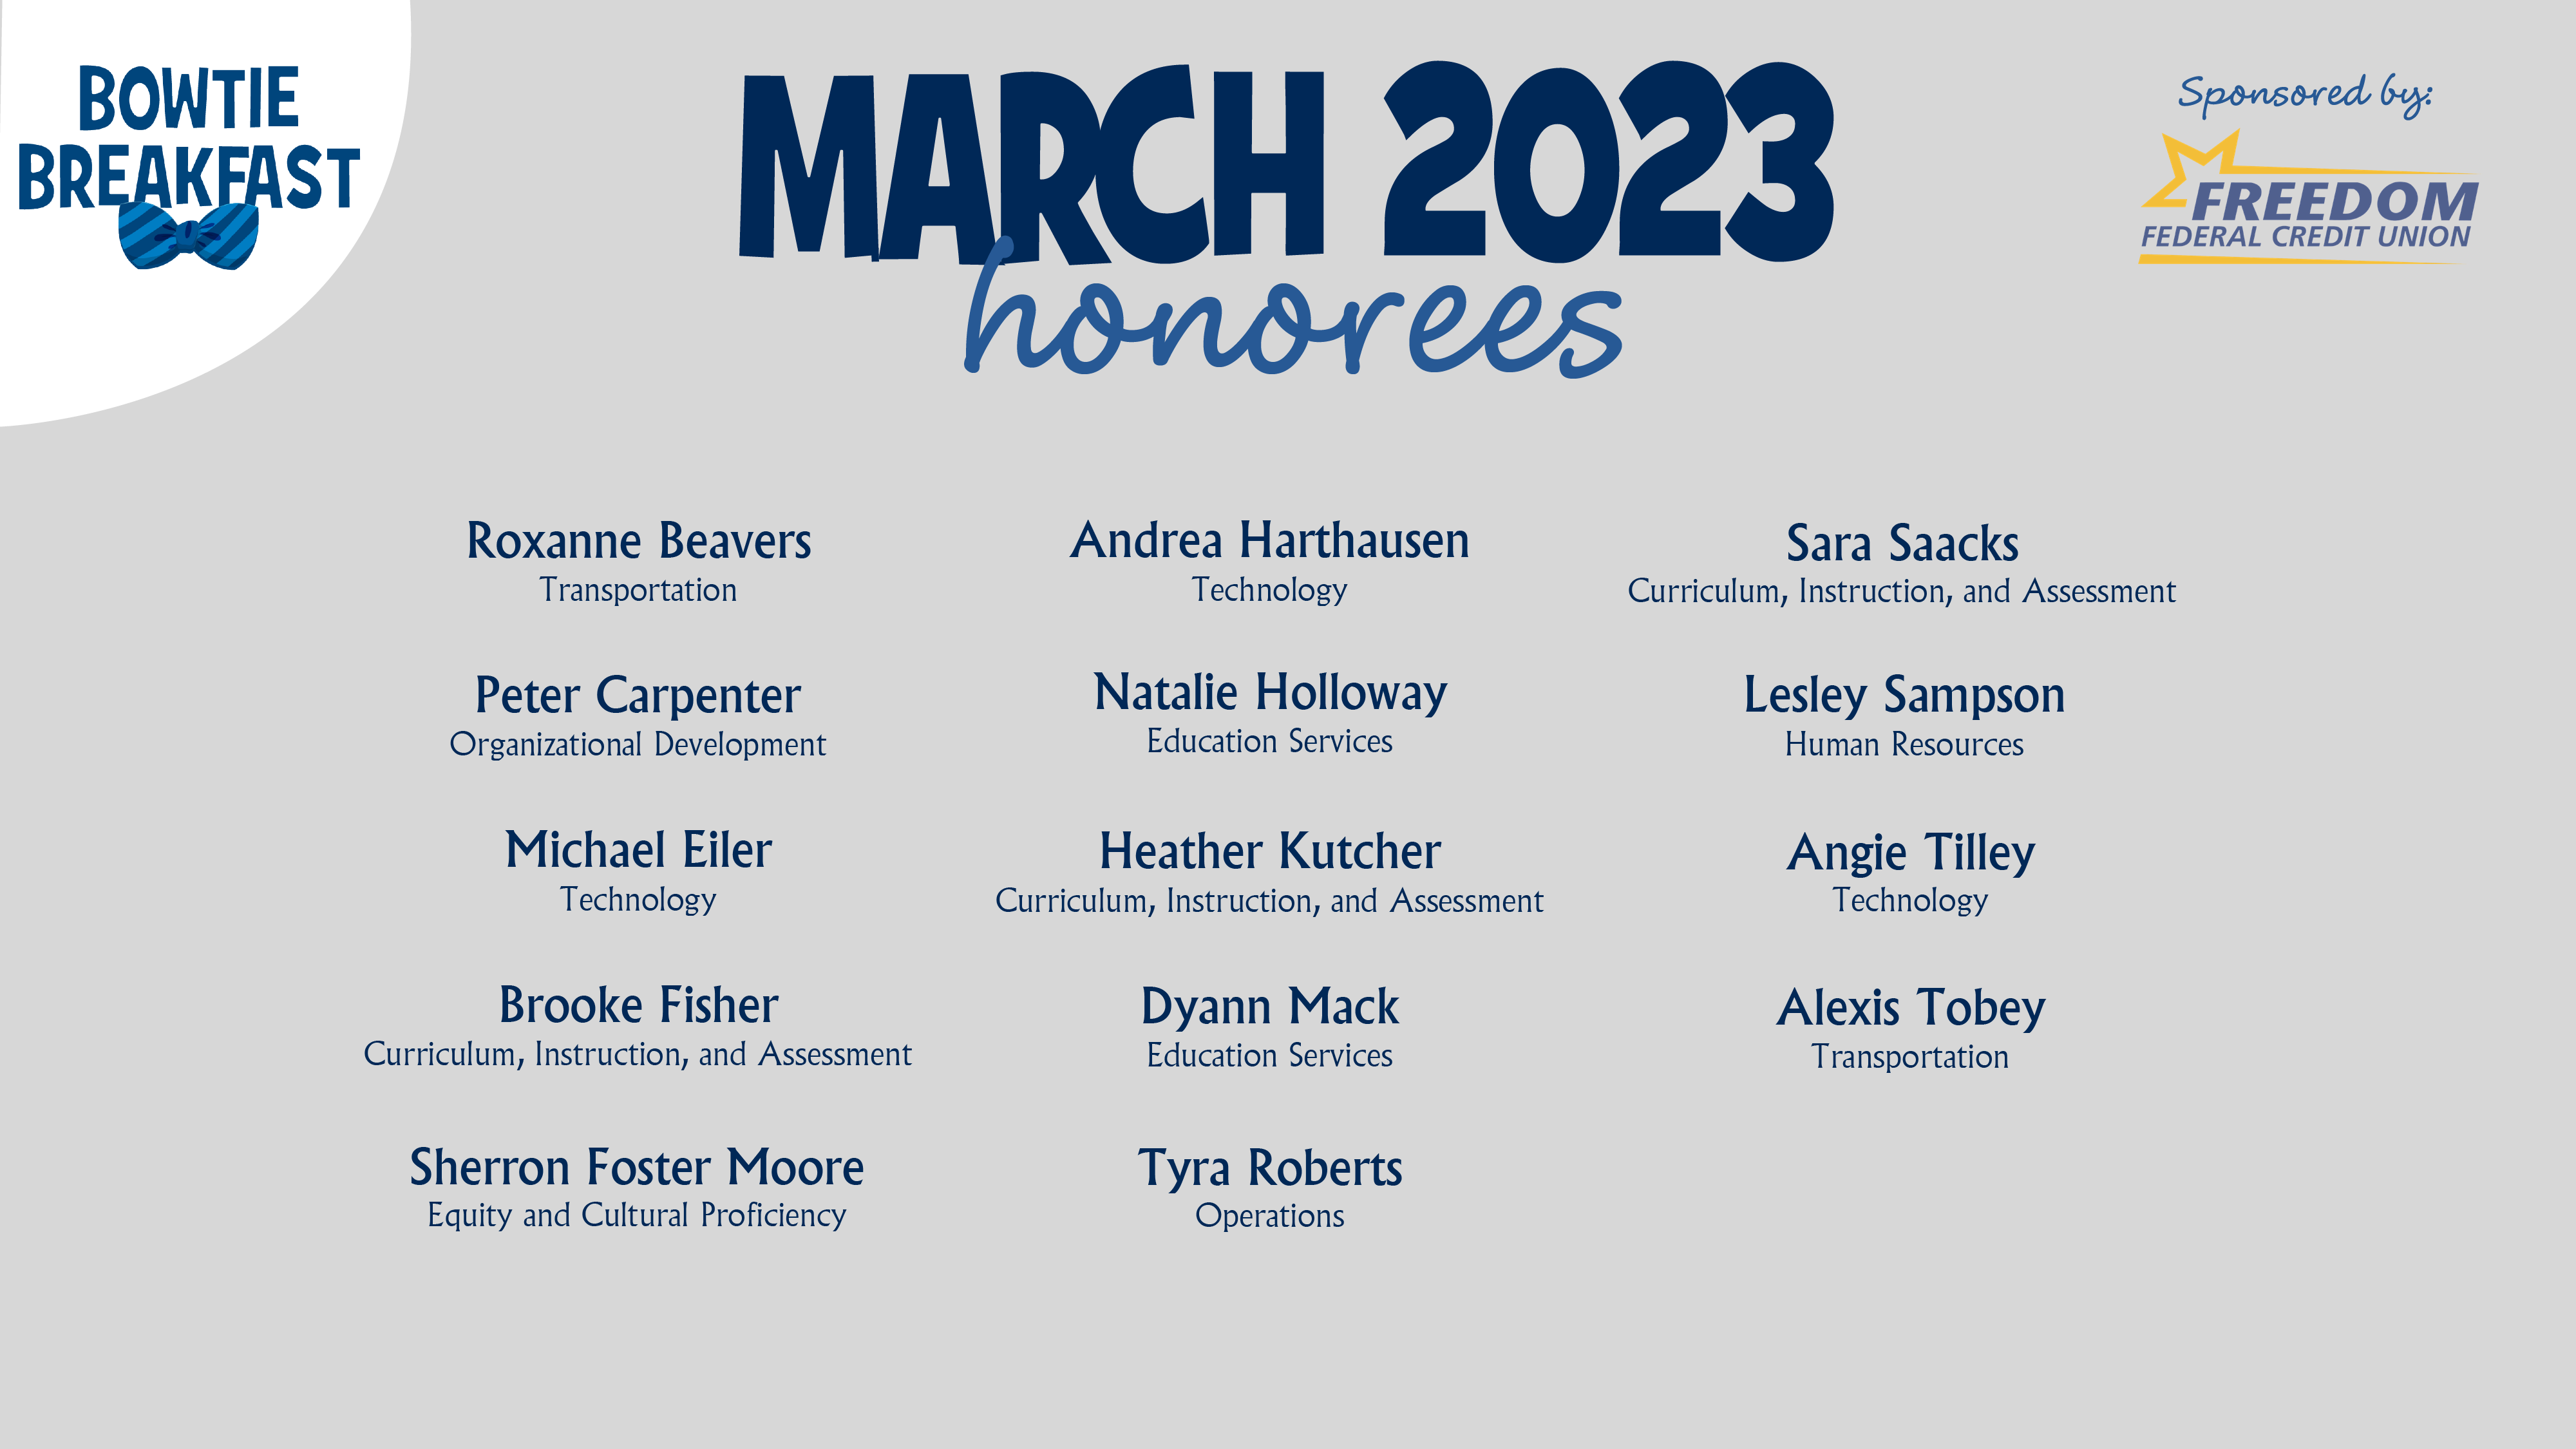 HCPS Bowtie Breakfast Honorees - March 2023